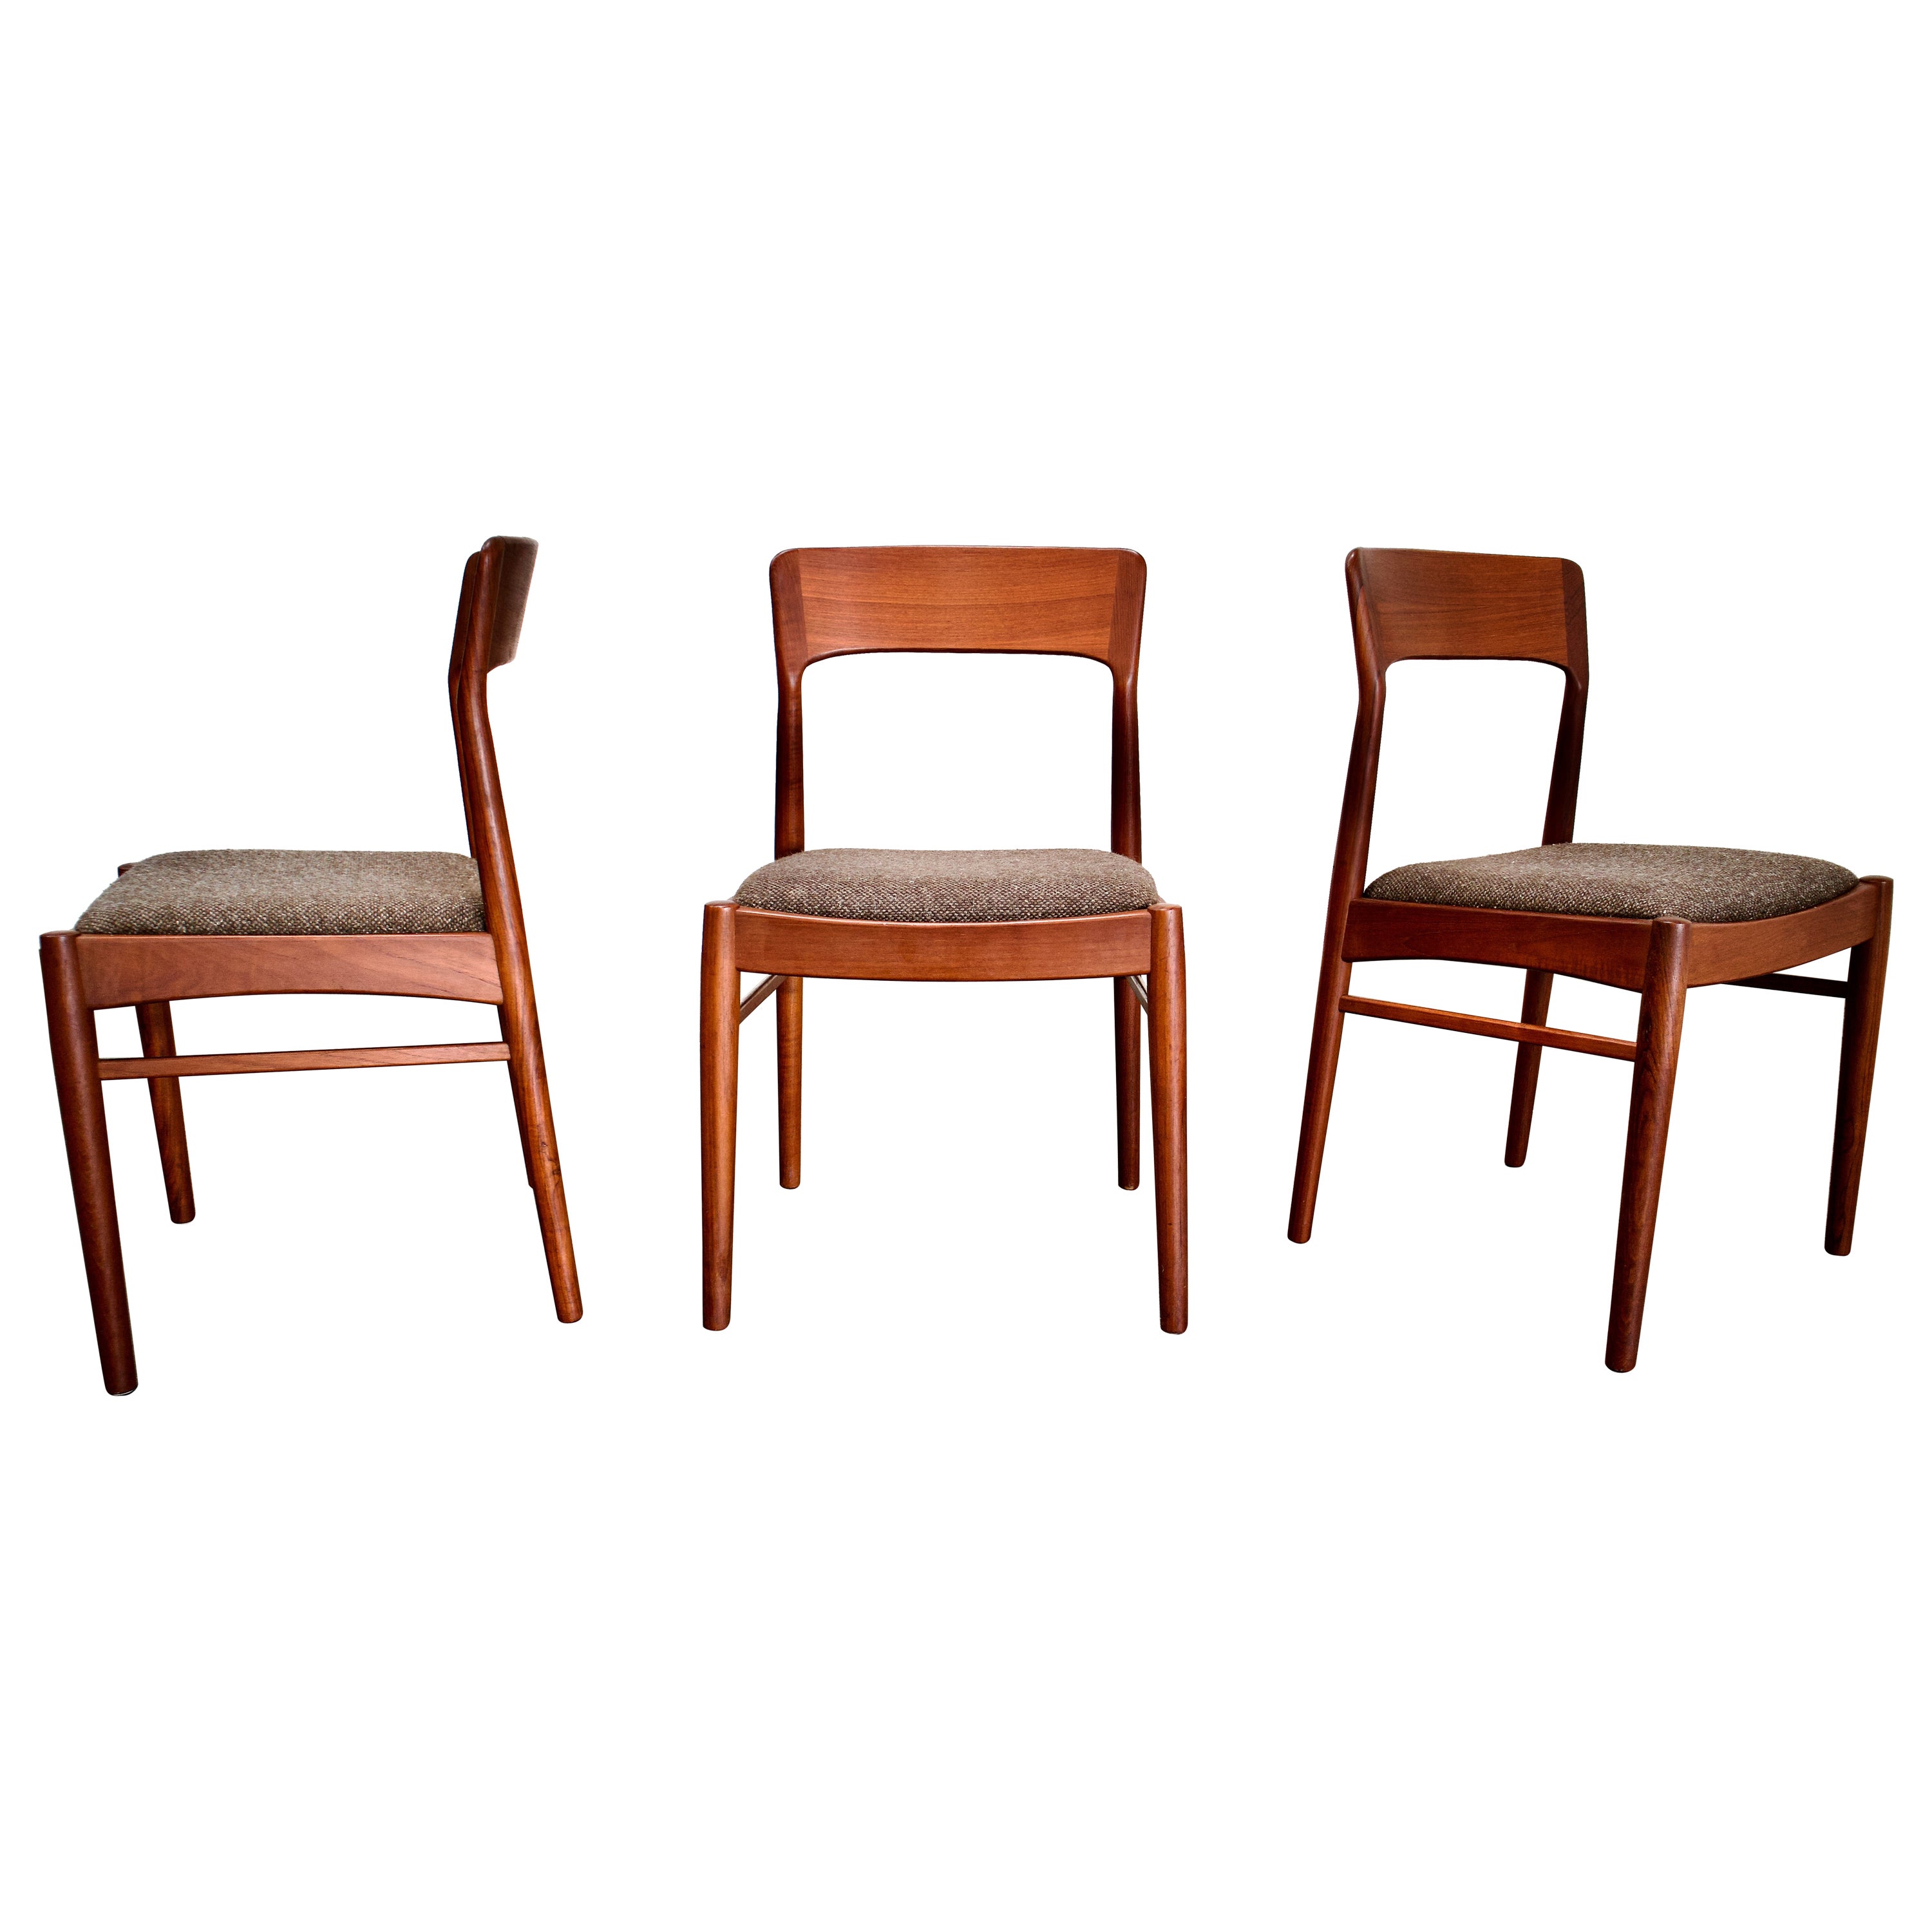 Quirky 1960s Danish Teak Chairs By Kai Kristiansen for K.S. Mobler For Sale